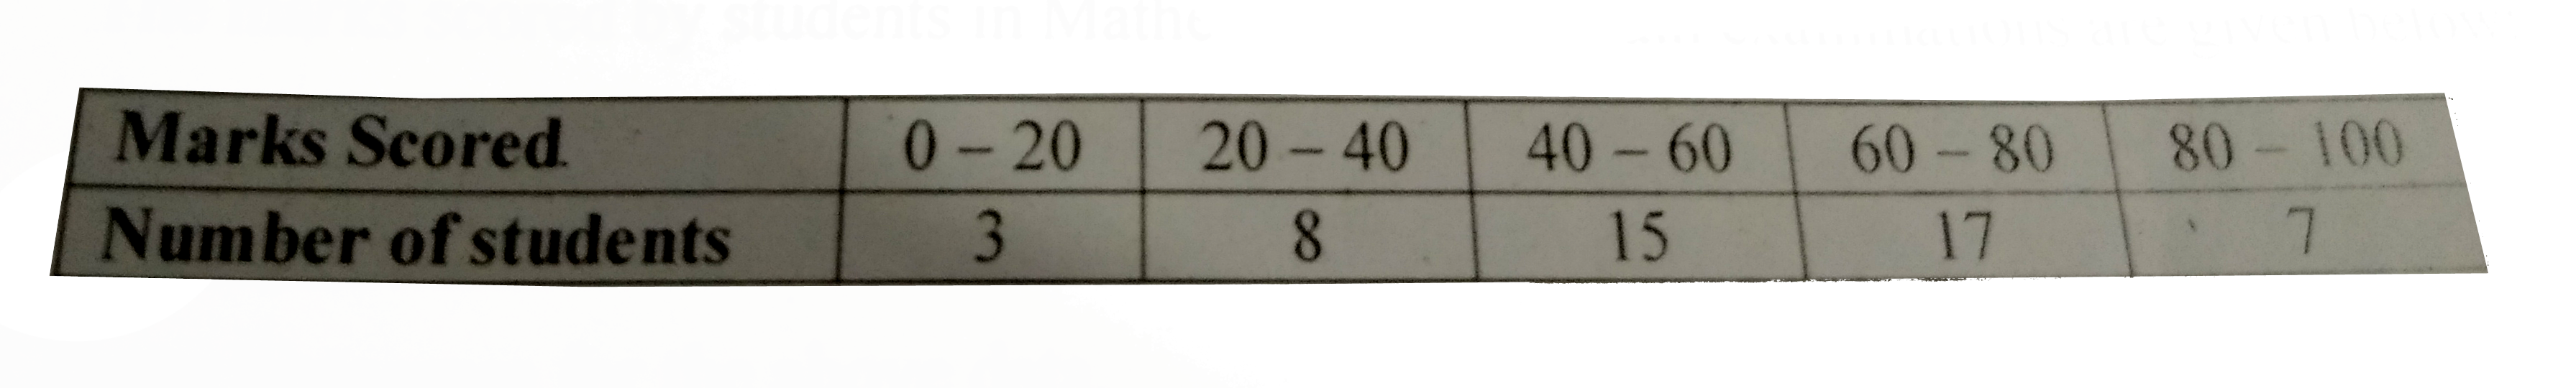 The marks scored by students in Mathematics in a certain examinations are given below:      Draw histogram for the above data.